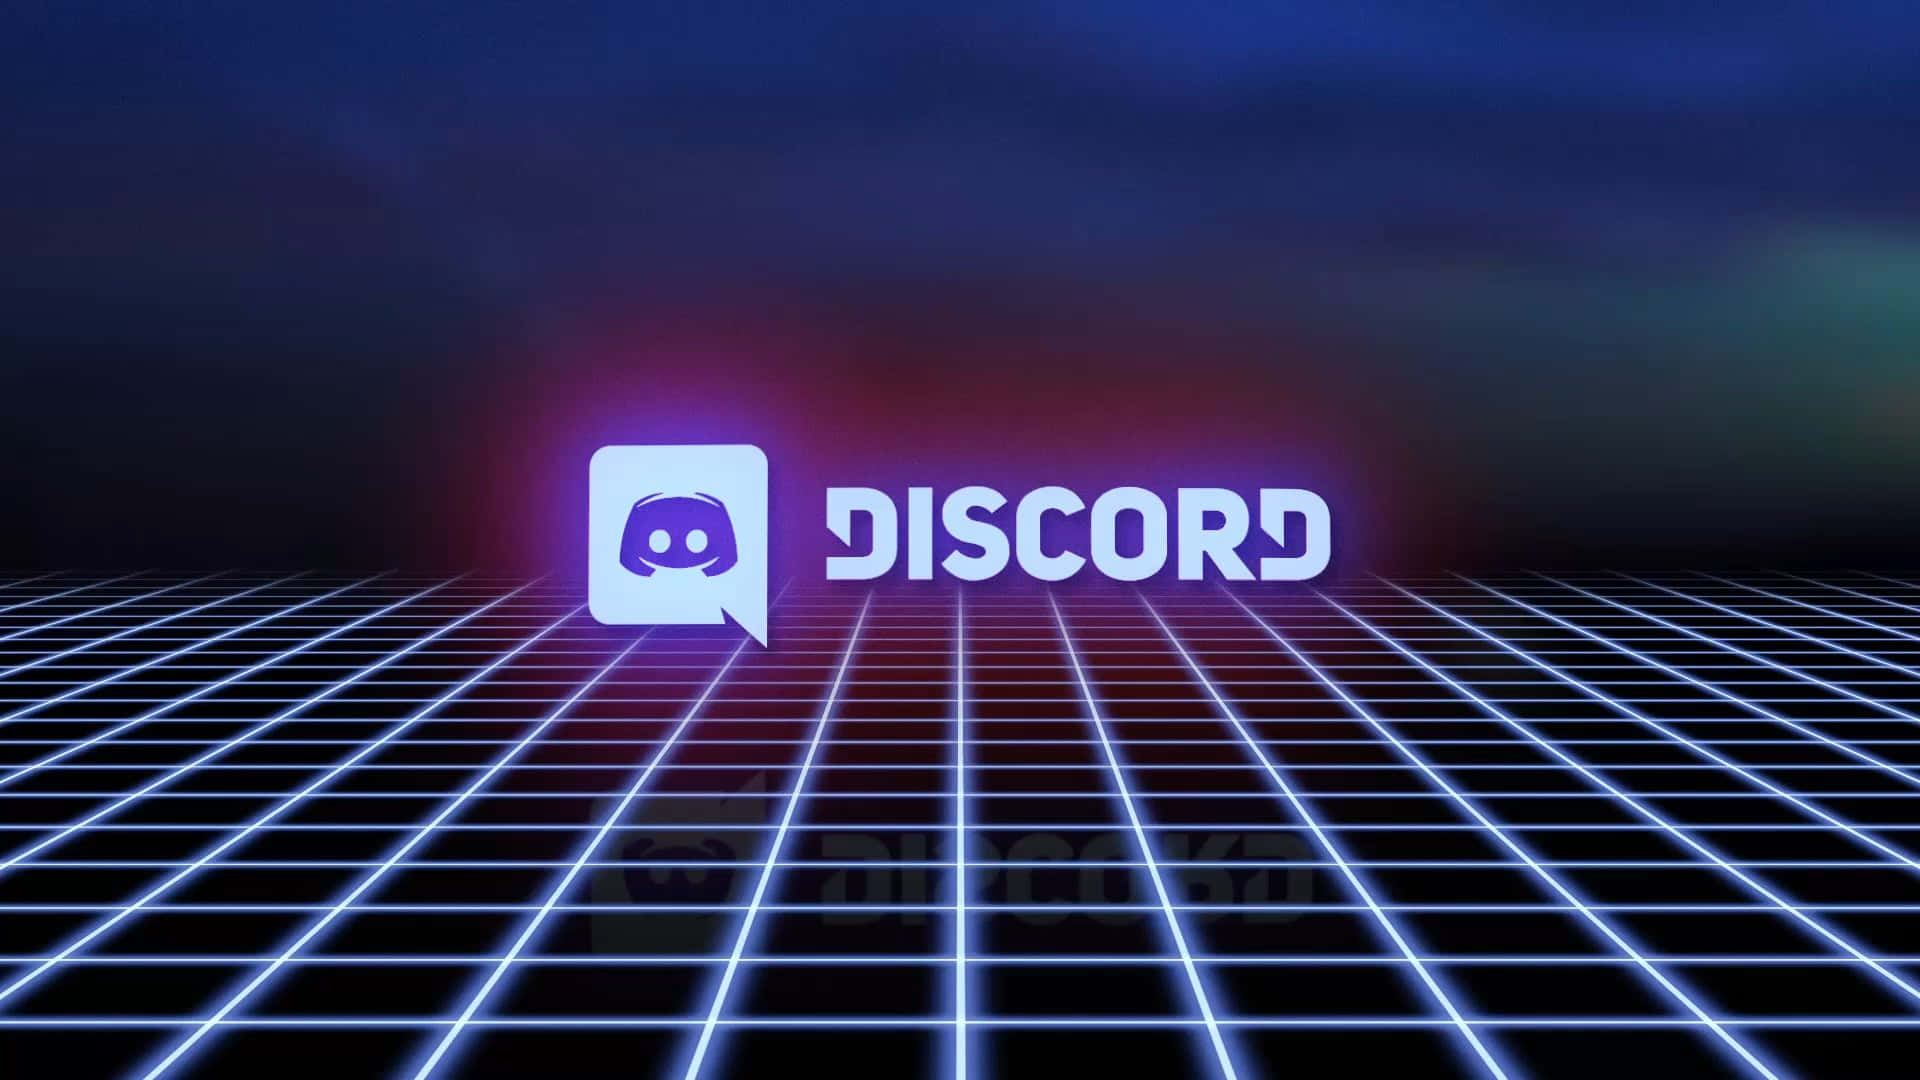 Download Enjoy Your Discord Experience with a Stylish Background